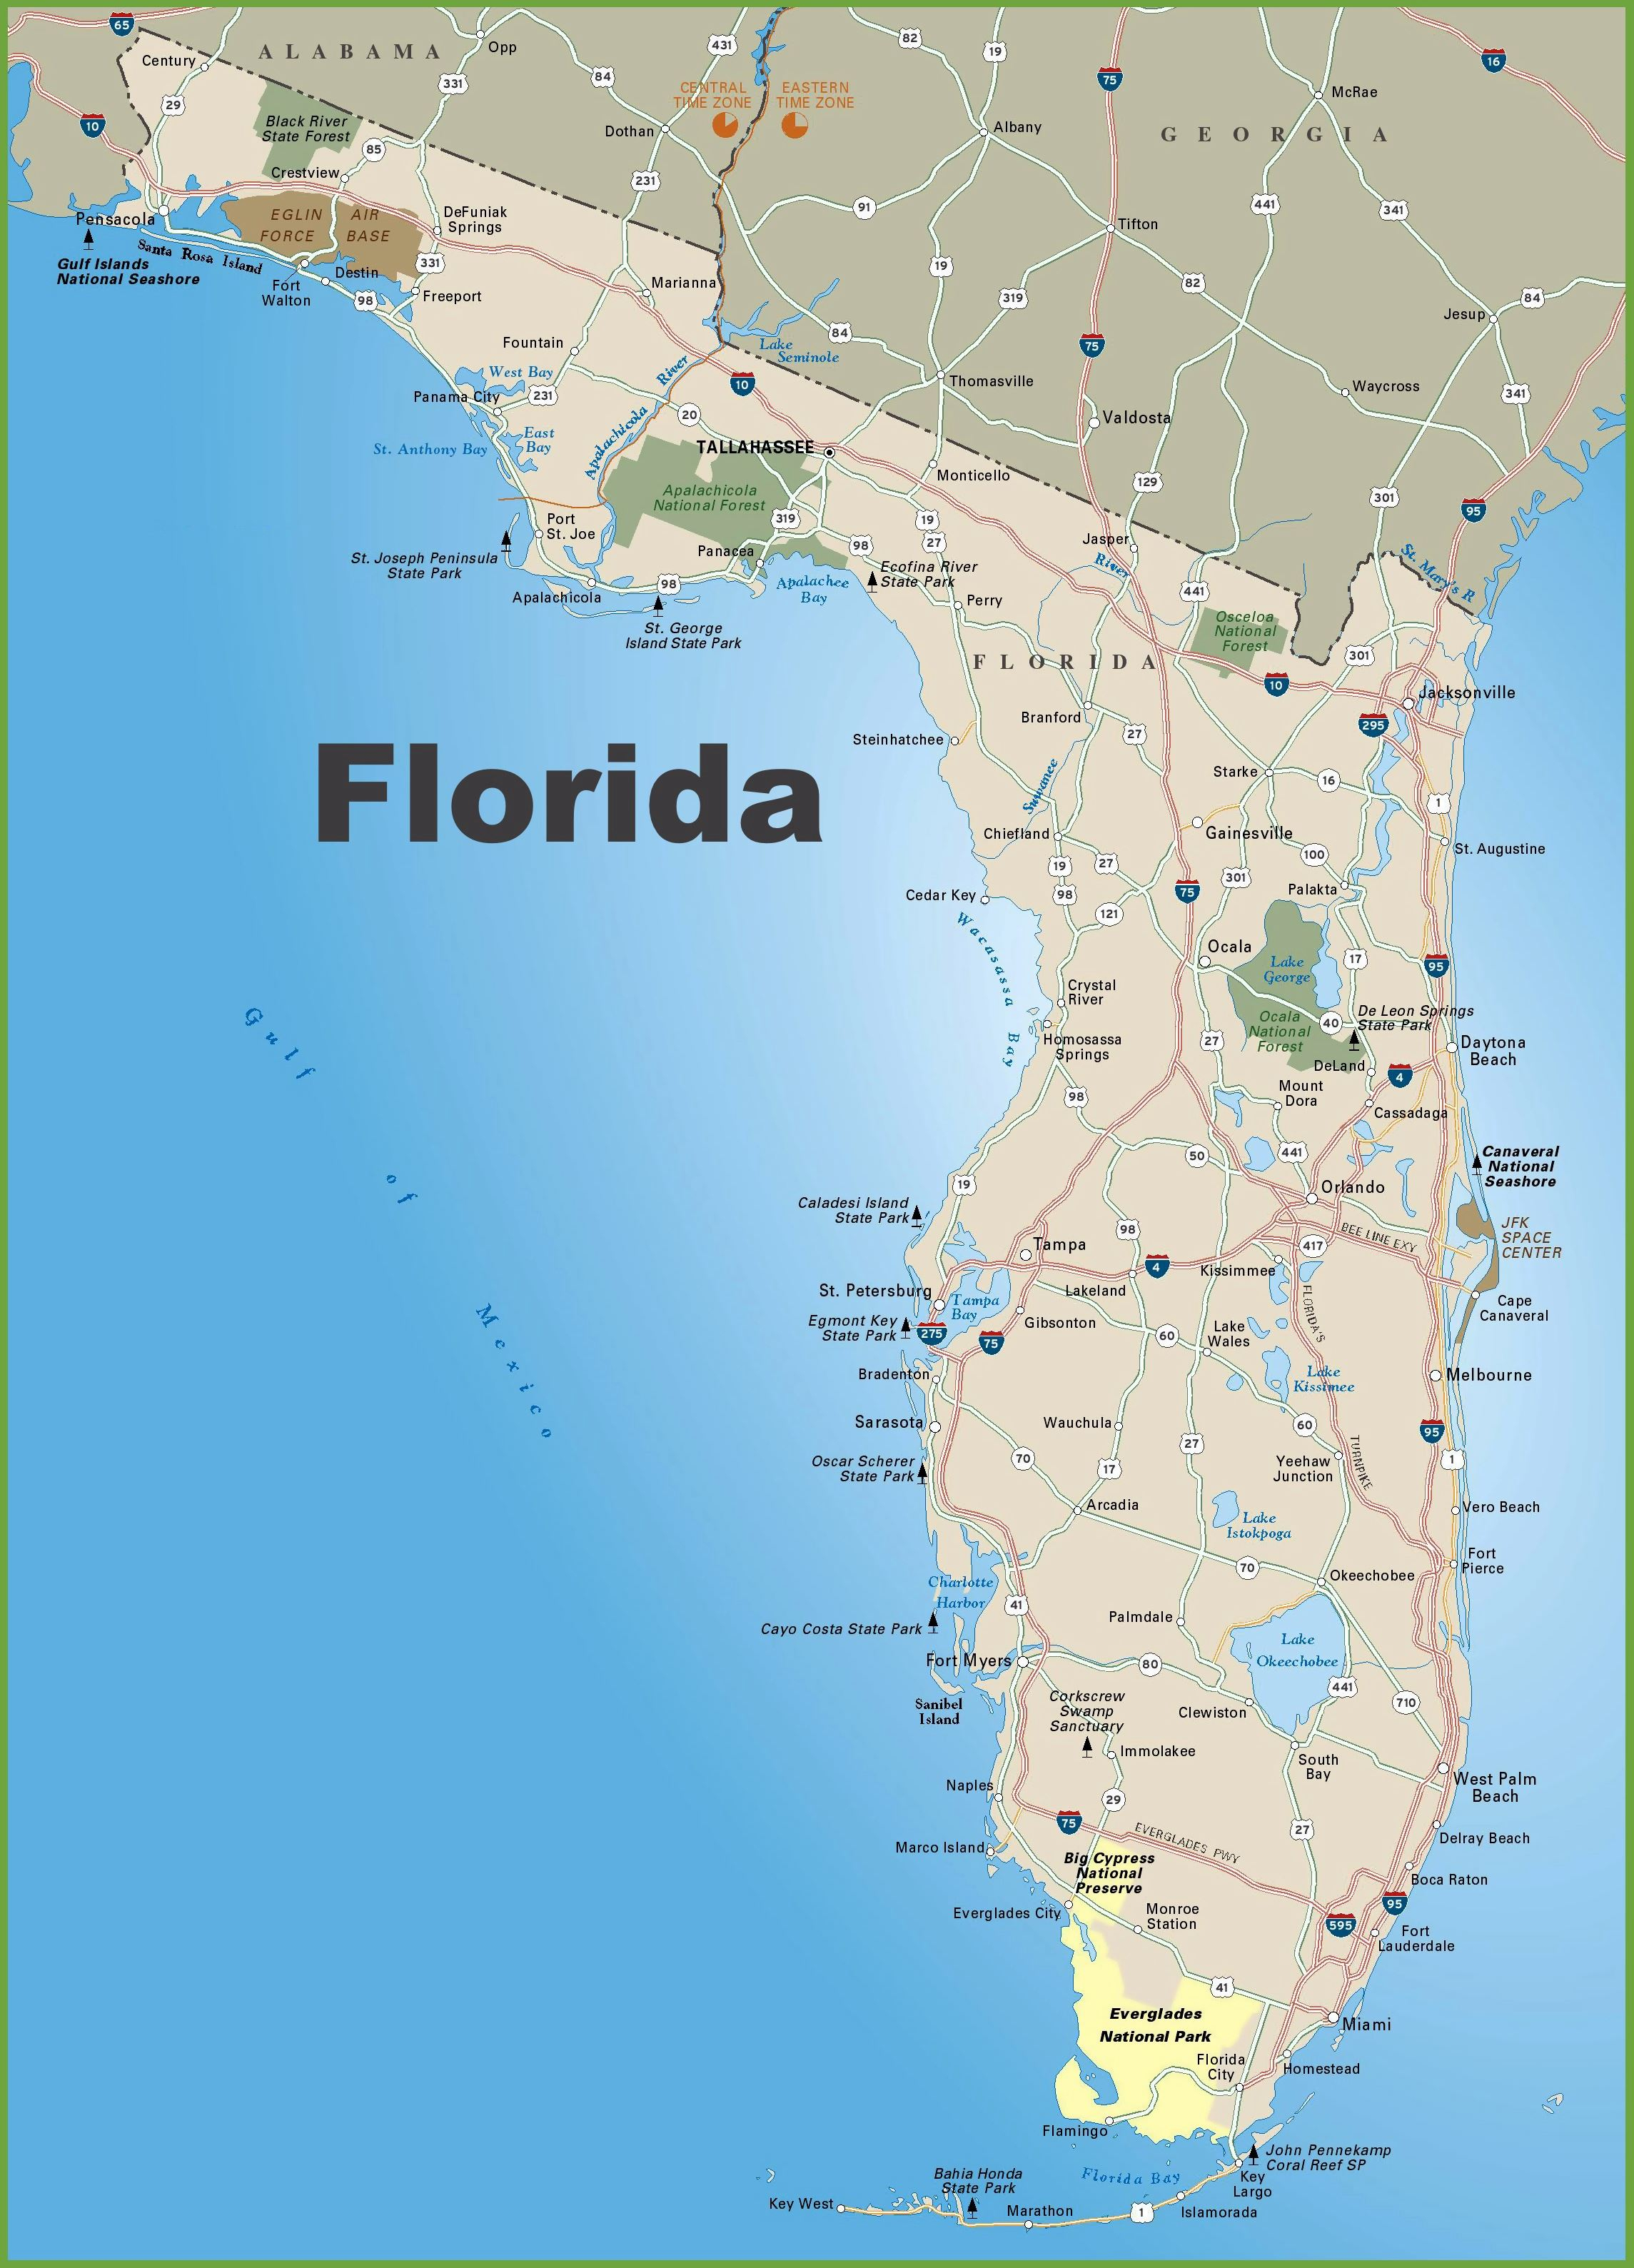 Large Florida Maps For Free Download And Print | High-Resolution And - Www Map Of Florida